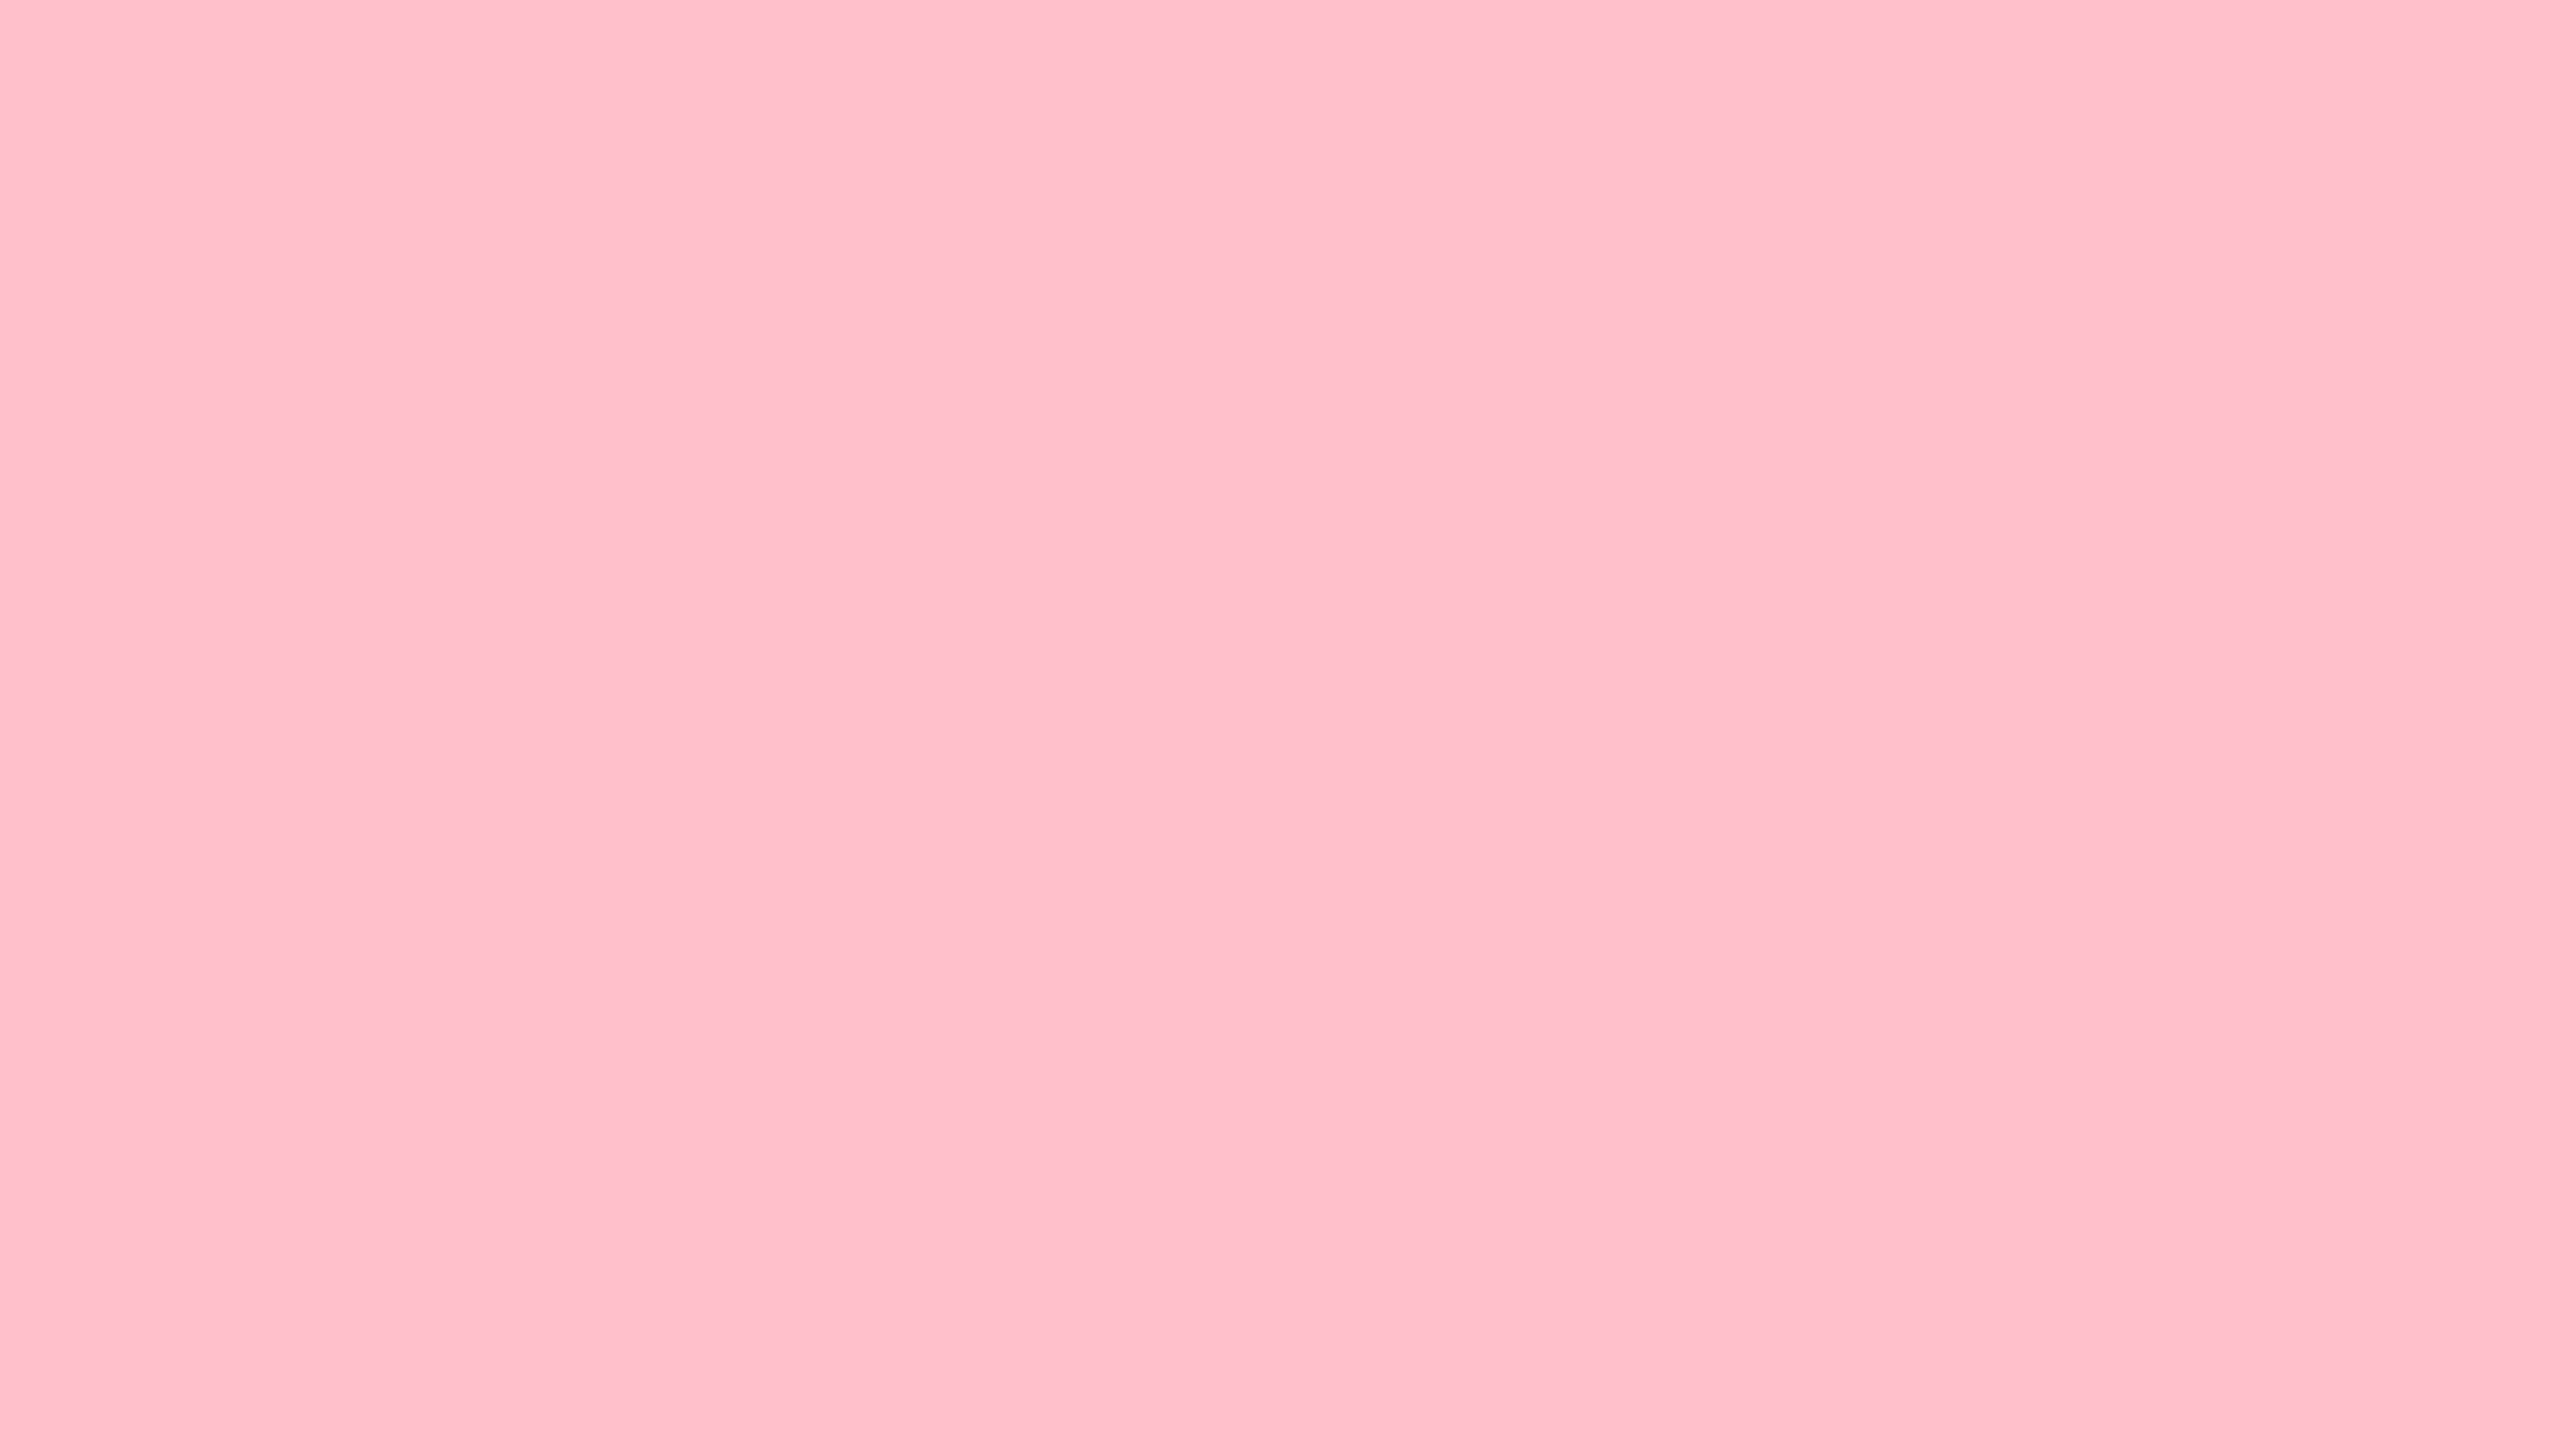 7680x4320 Pink Solid Color Background